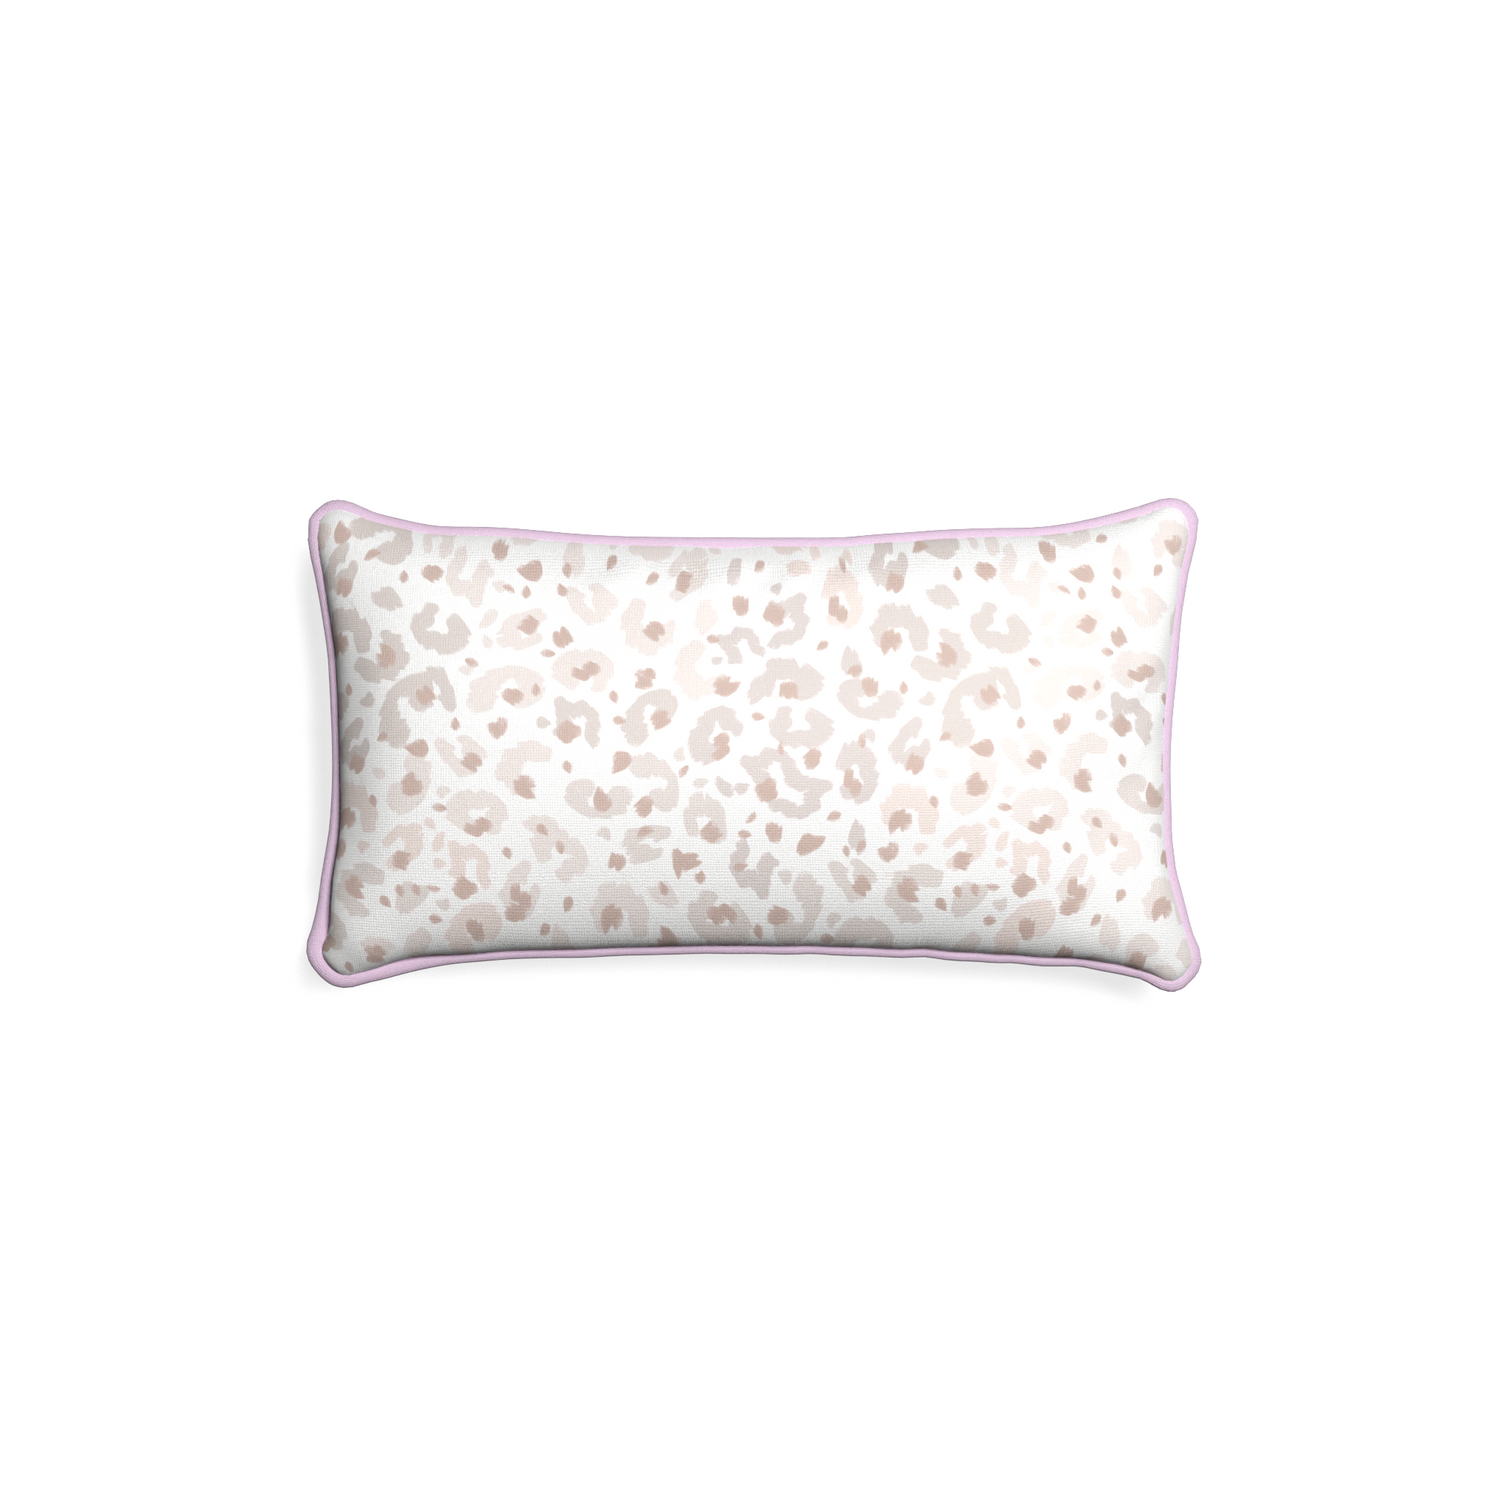 Petite-lumbar rosie custom beige animal printpillow with l piping on white background